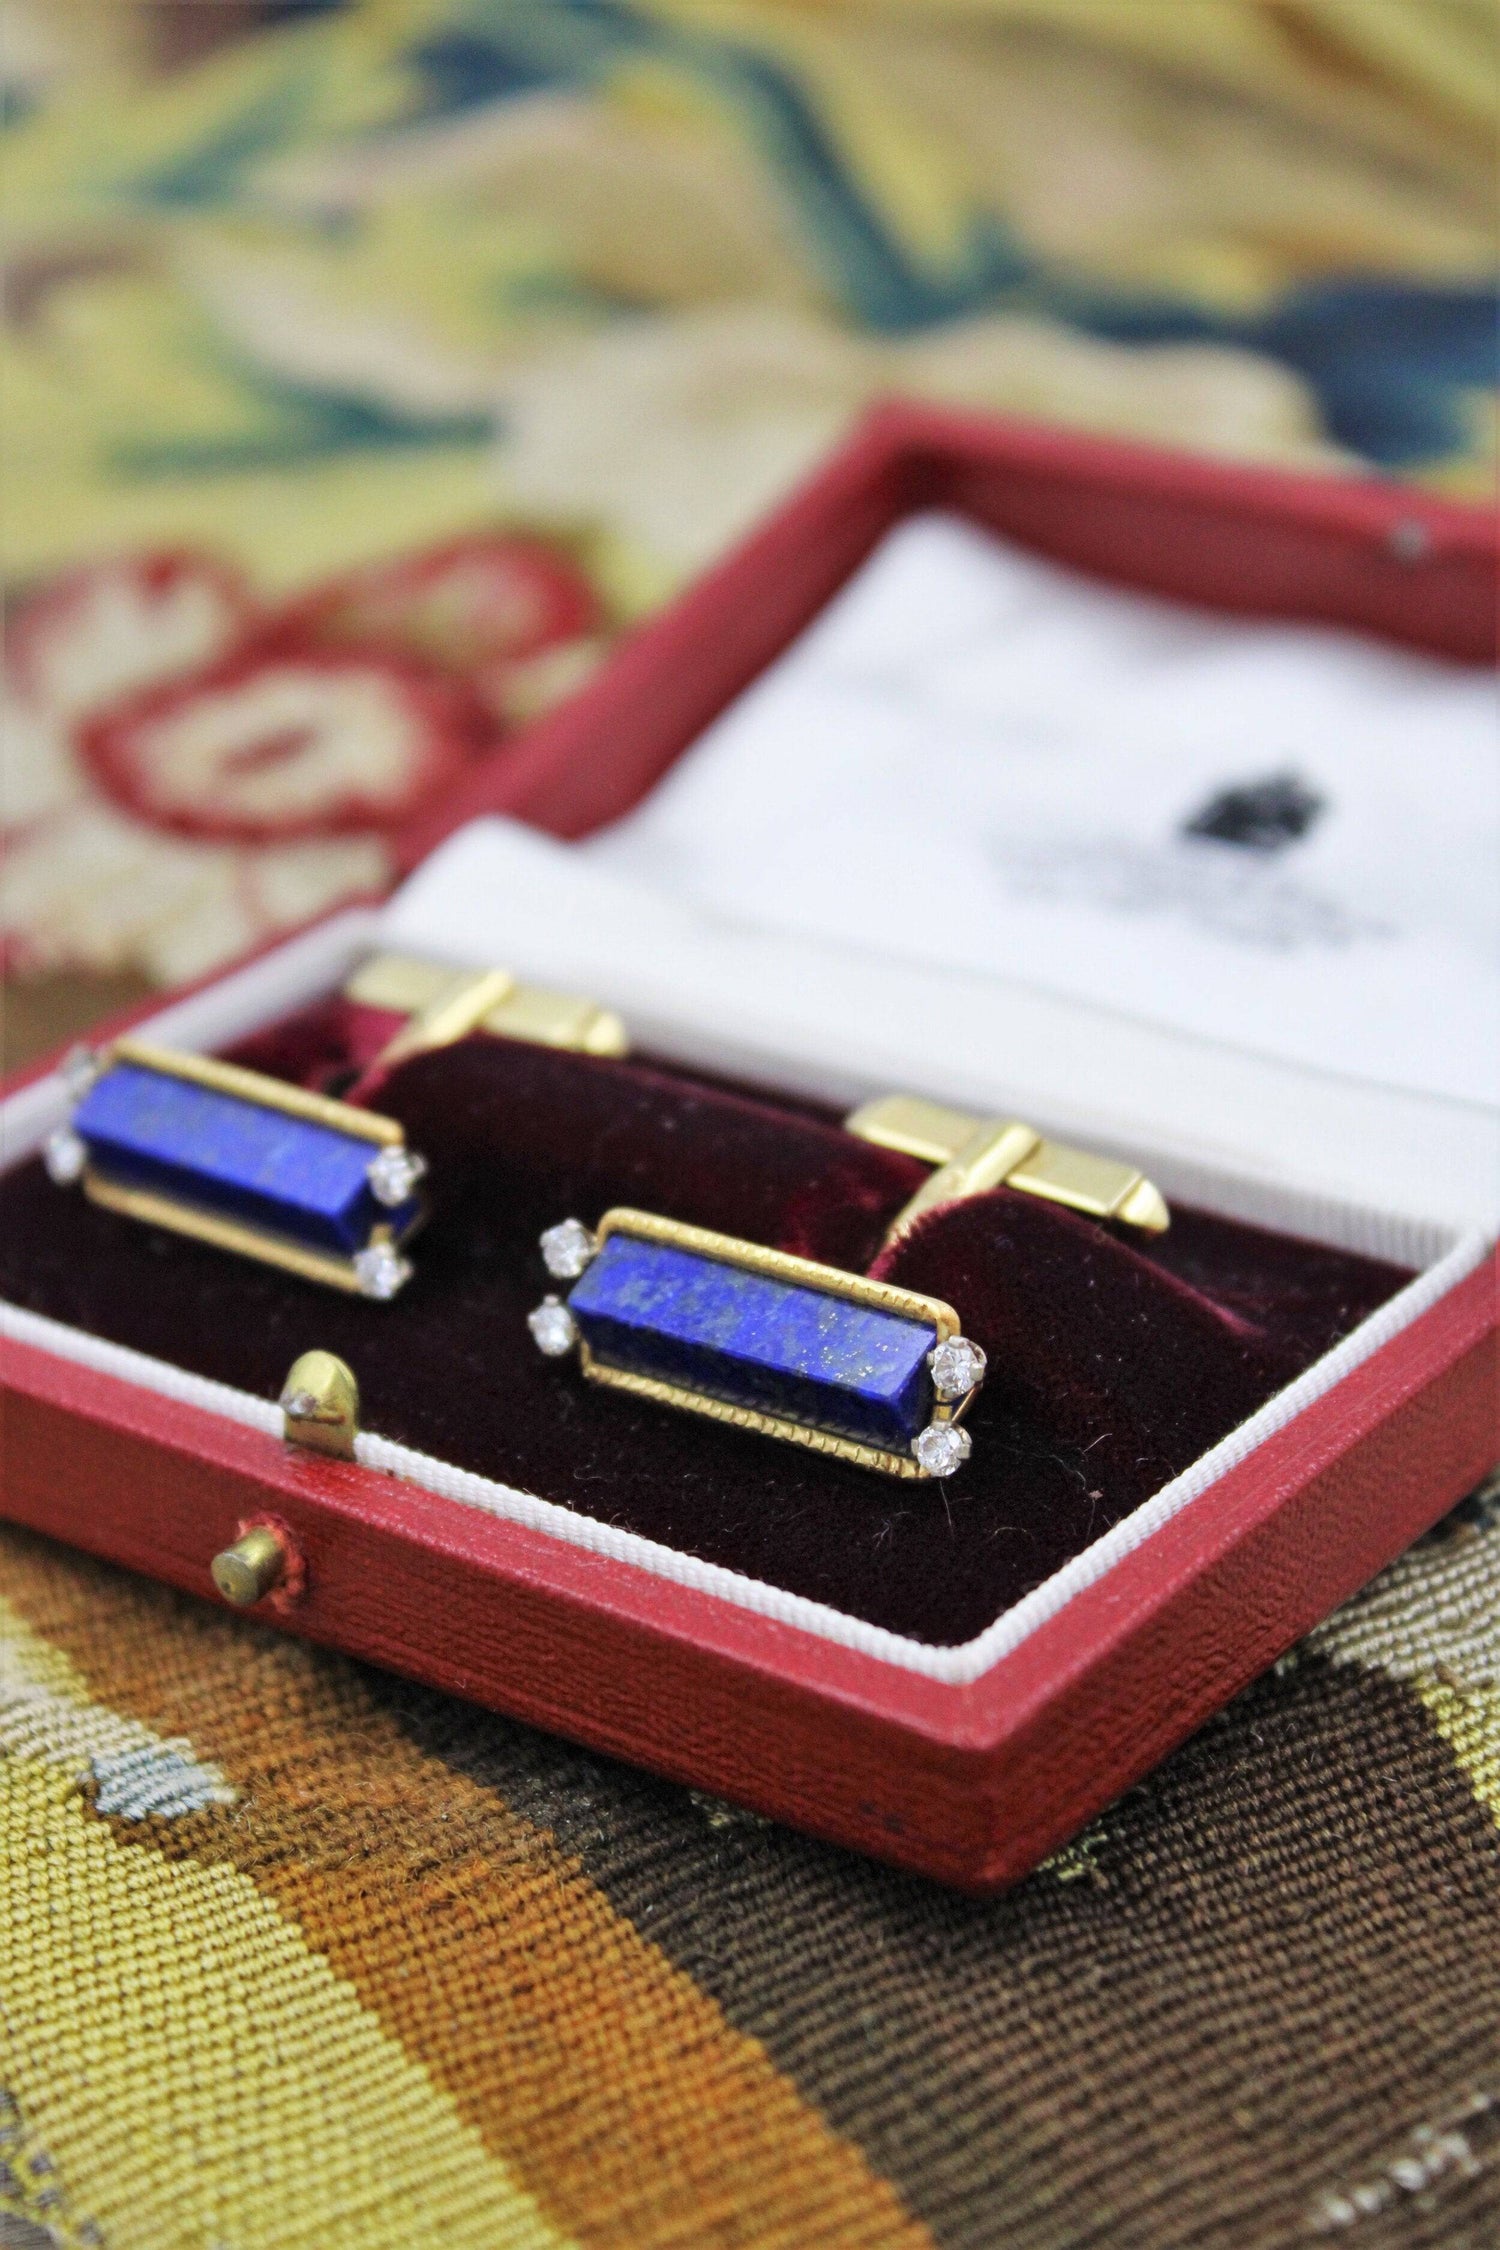 An exceptional pair of Lapis Lazuli and Diamond Cufflinks mounted in 18 Carat Yellow Gold, Aspreys' Date Mark 1974 - Robin Haydock Antiques